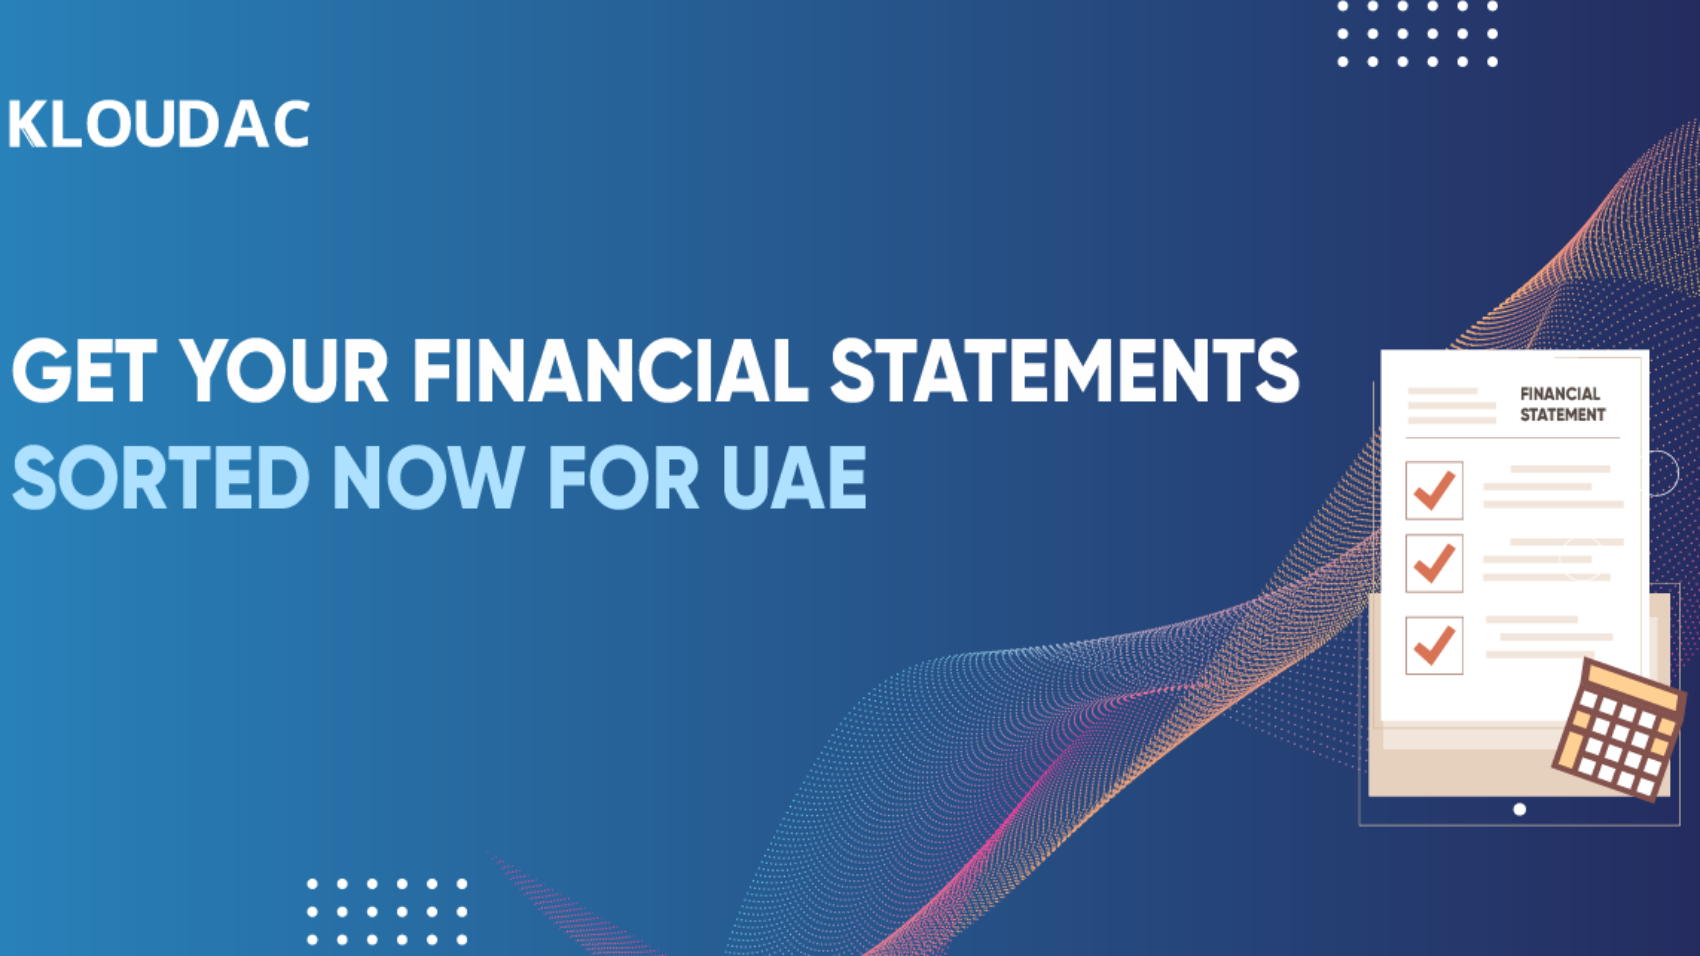 Get your financial statements sorted now for UAE